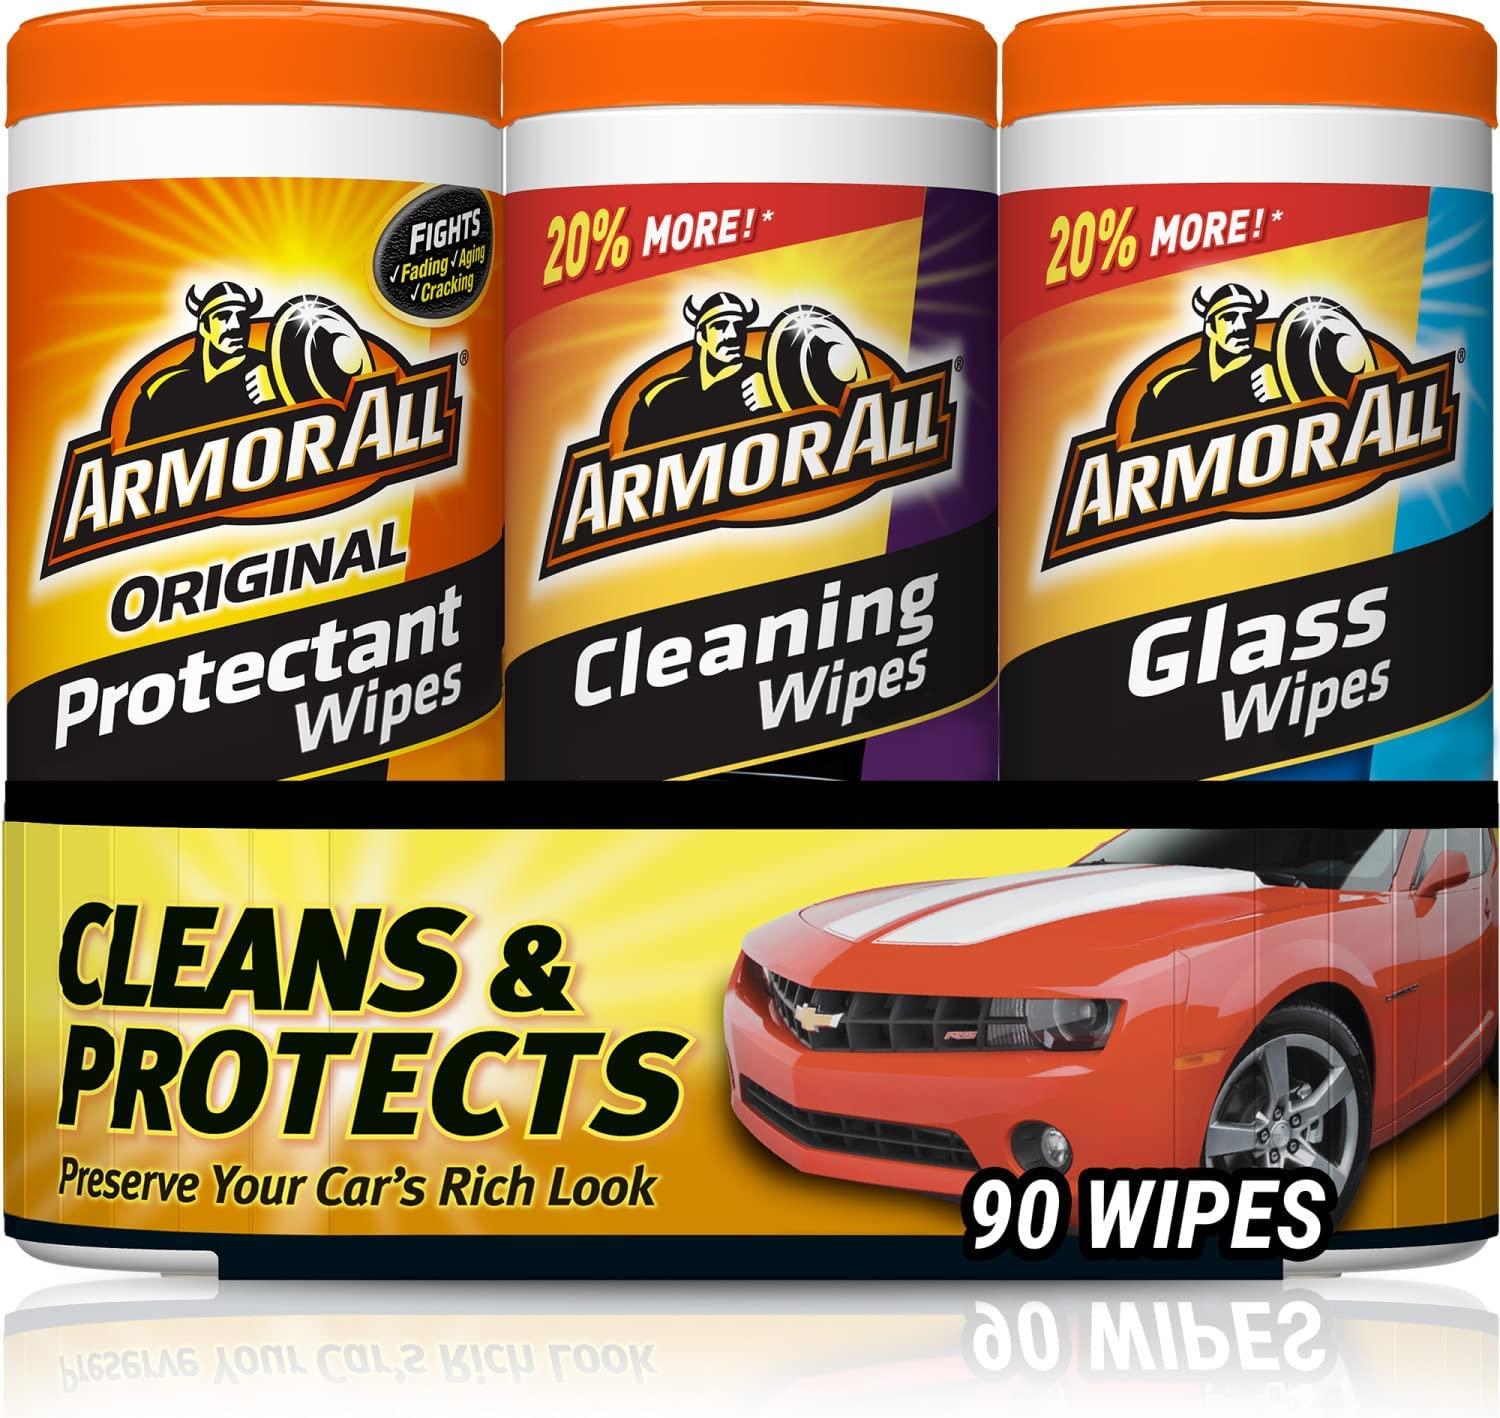 Armor All Automotive Wipes 3 Pack for $9.69 Shipped